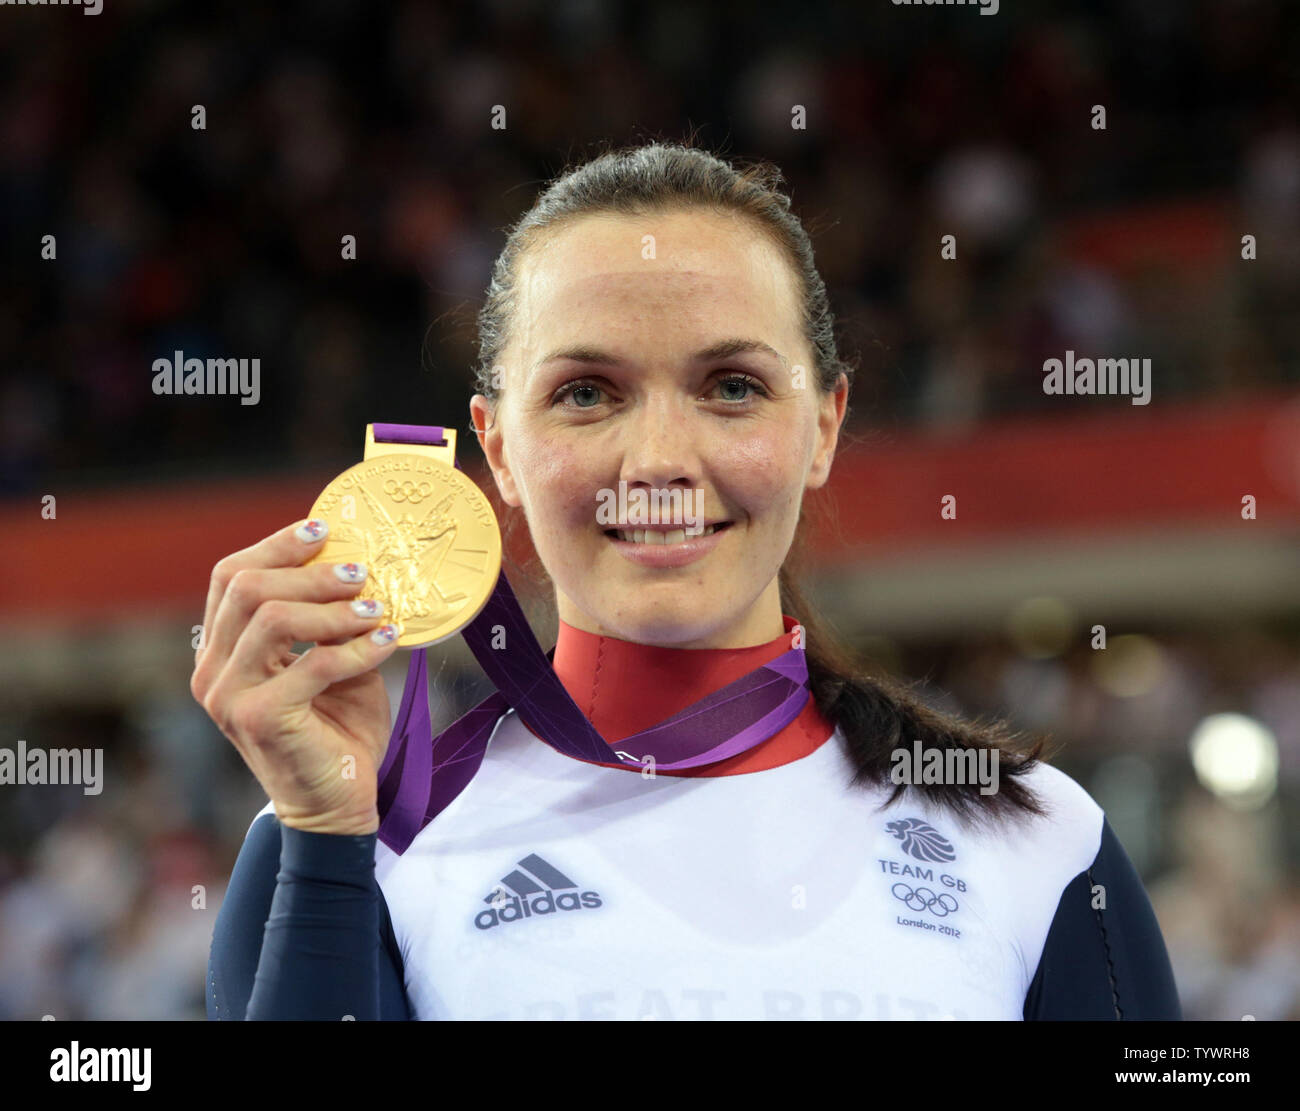 Great Britain's Victoria Pendleton holds her gold medal after winning the Women's Kerin cycling event at the Velodrome at the London 2012 Summer Olympics on August 03, 2012 in  London.     UPI/Hugo Philpott Stock Photo